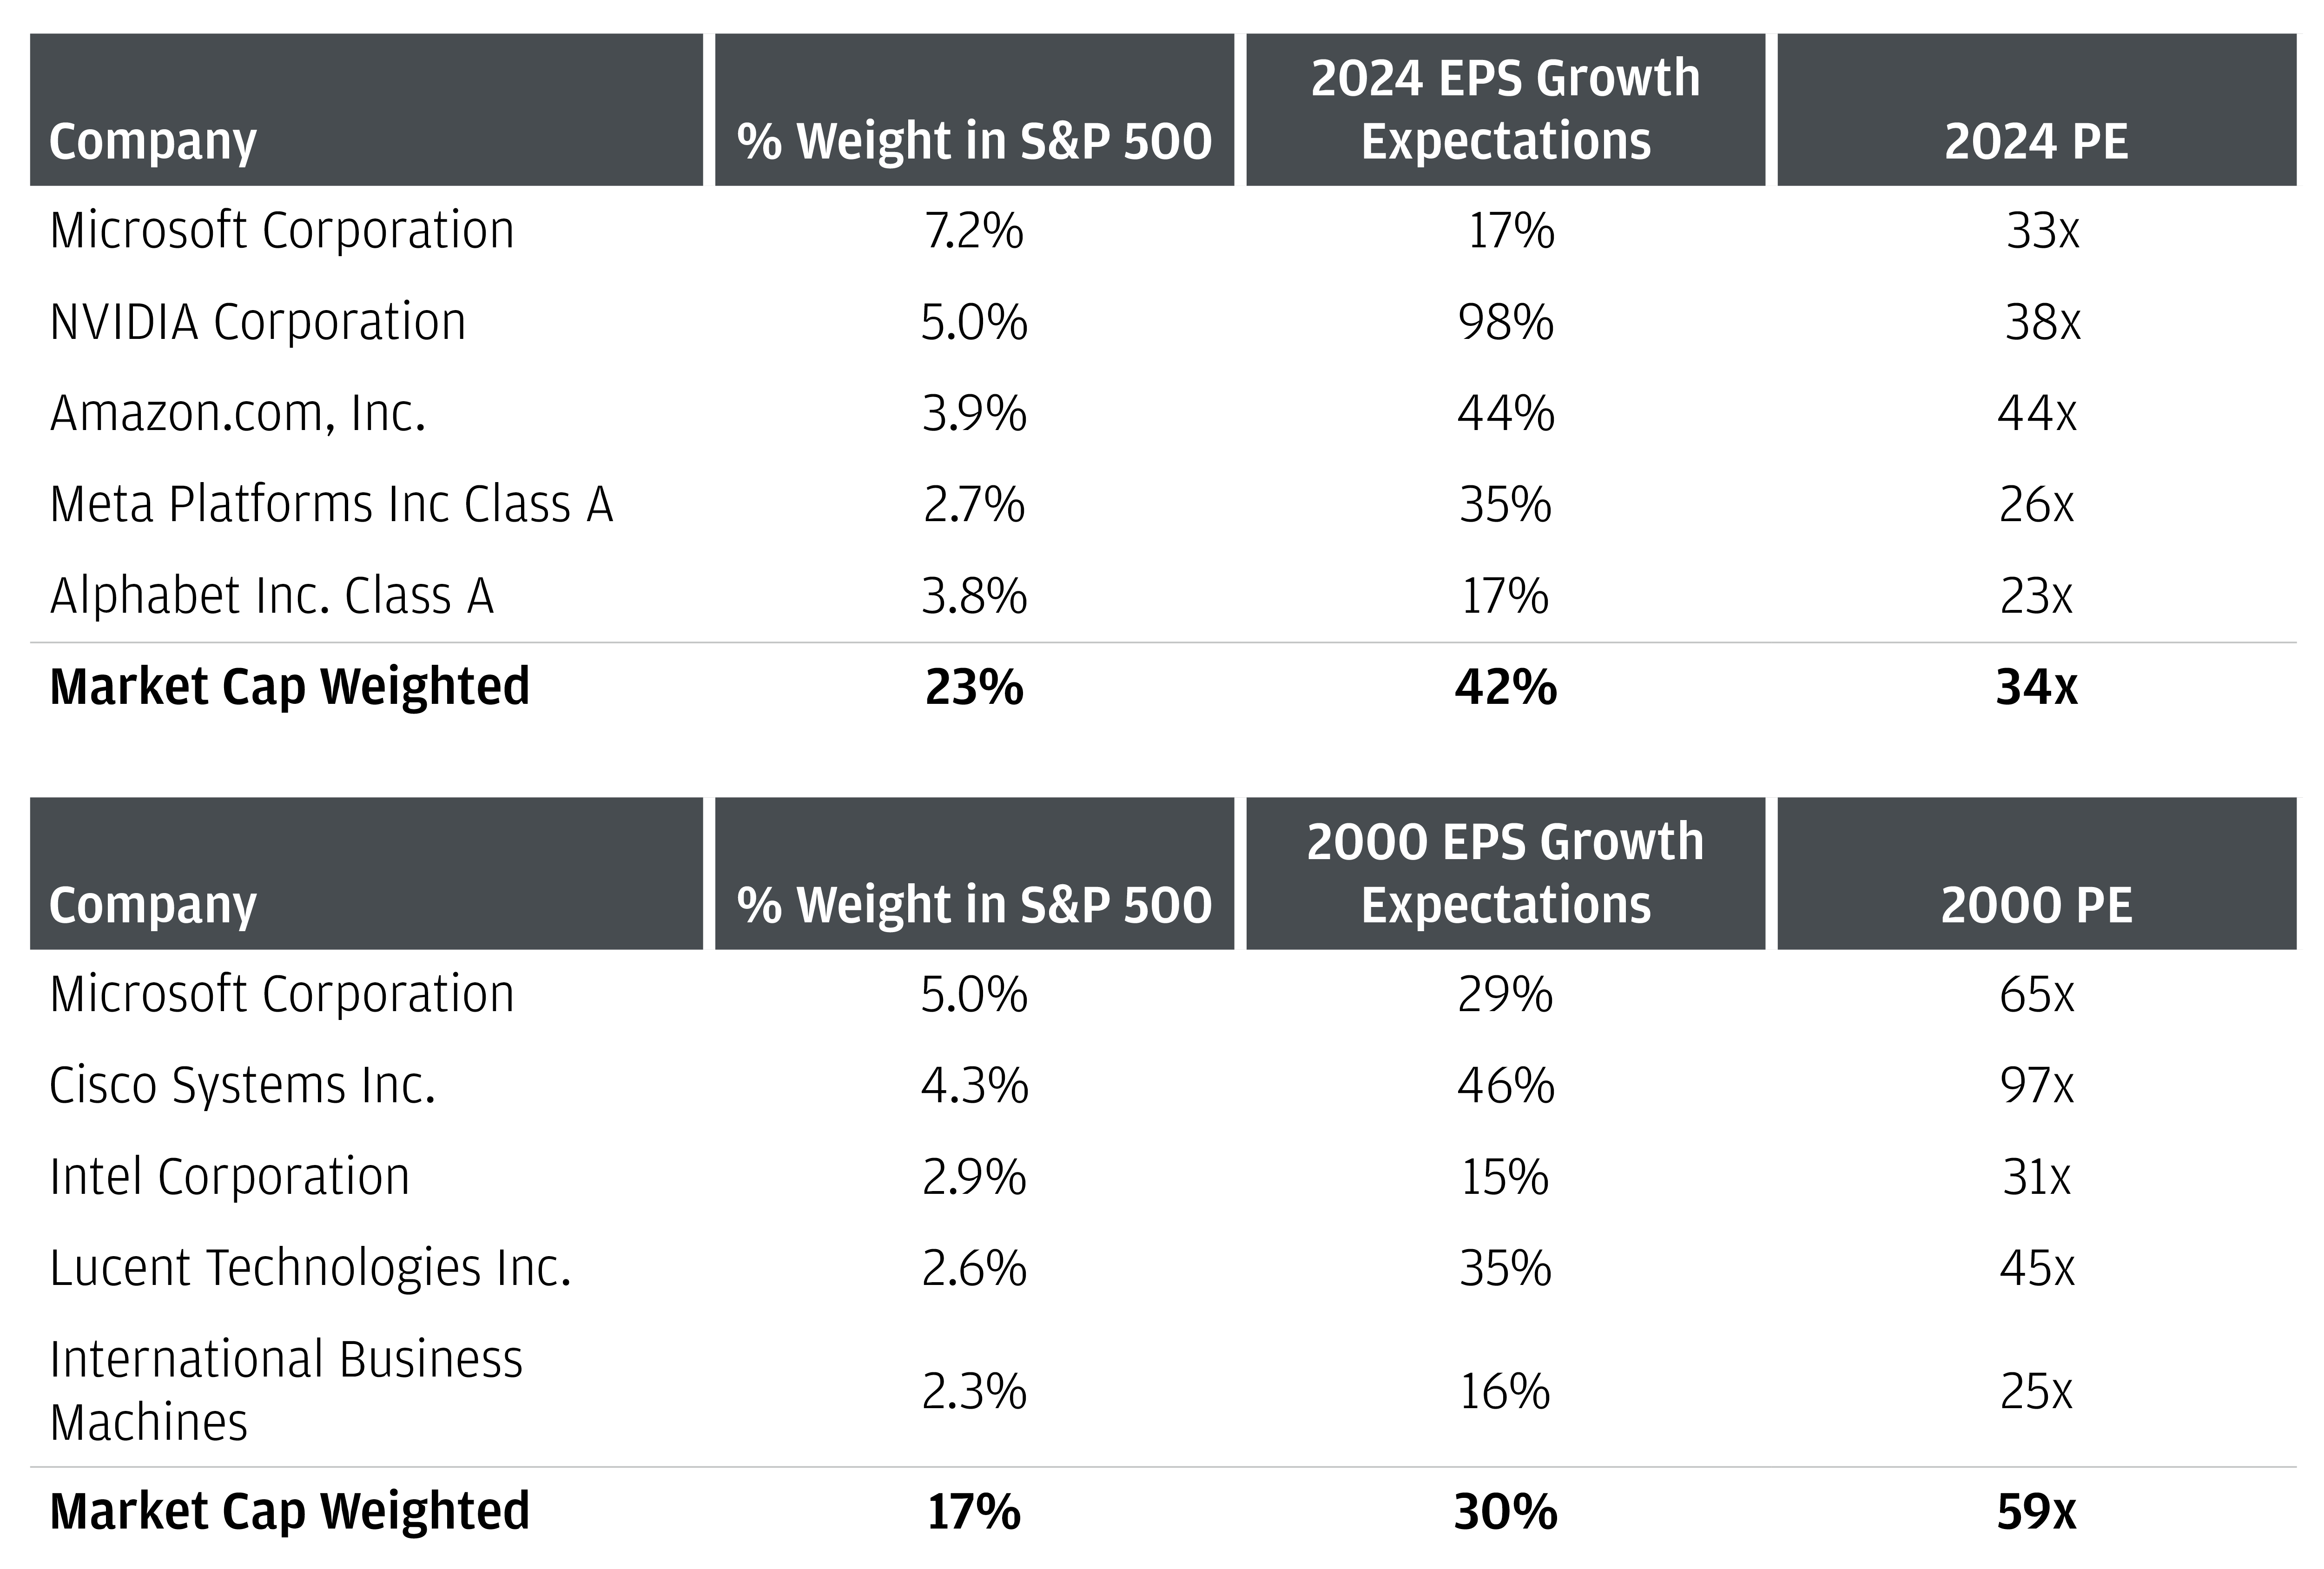 This table compares earnings growth and P/E ratios for leading tech stocks in 2000 and 2024.